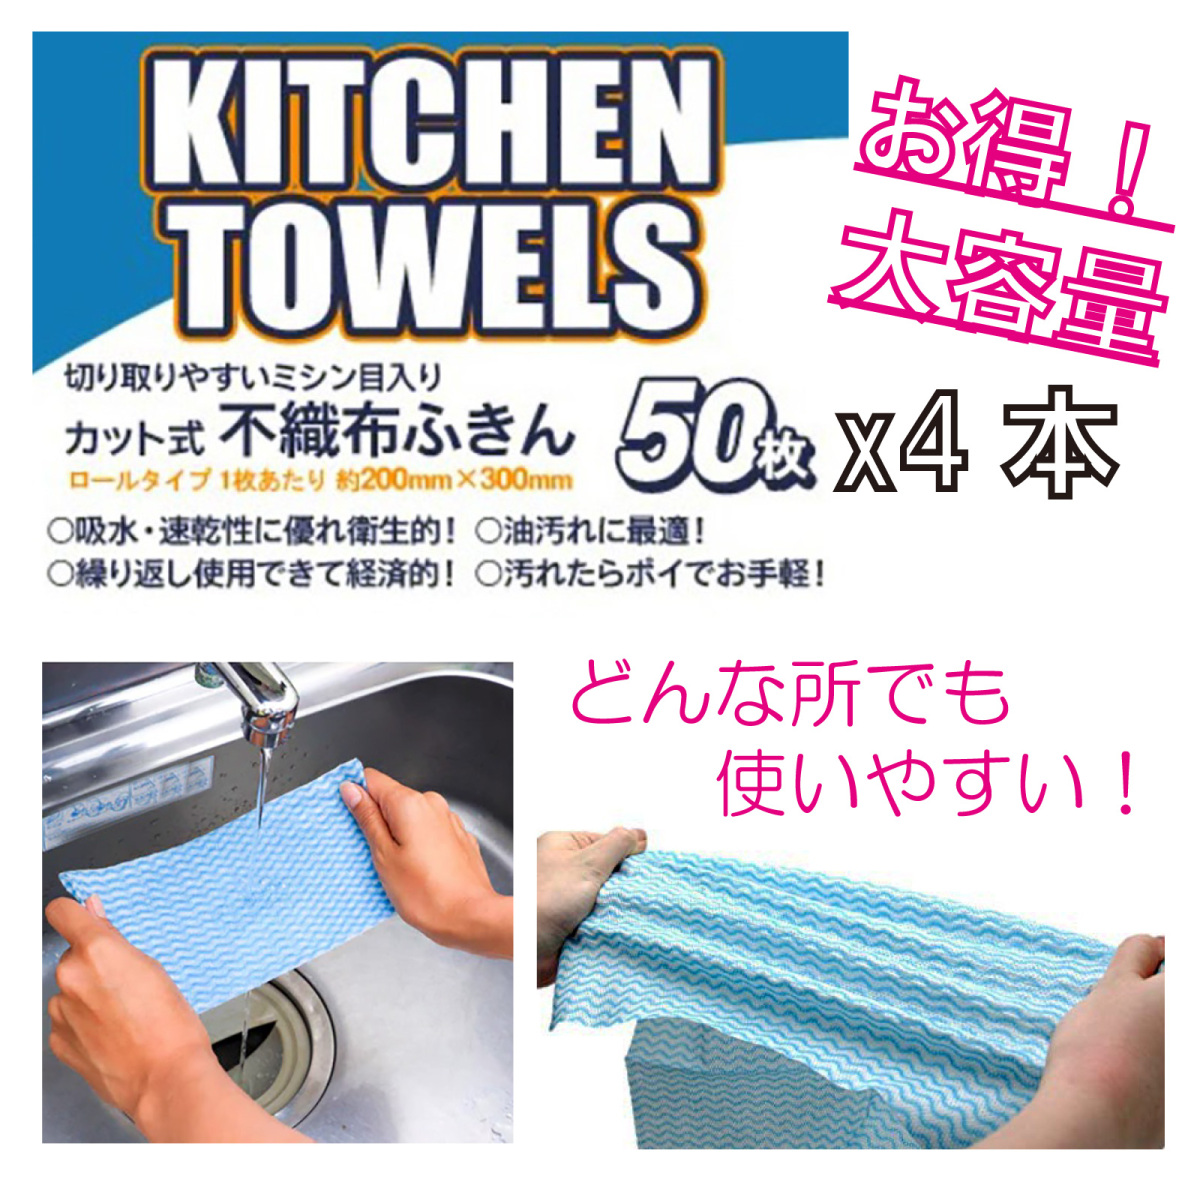  dish cloth table duster counter Cross business use 200 sheets thin non-woven speed . blue approximately 20x28.5cm 50 sheets x4 roll various use convenience disposable feeling all-purpose dish cloth 